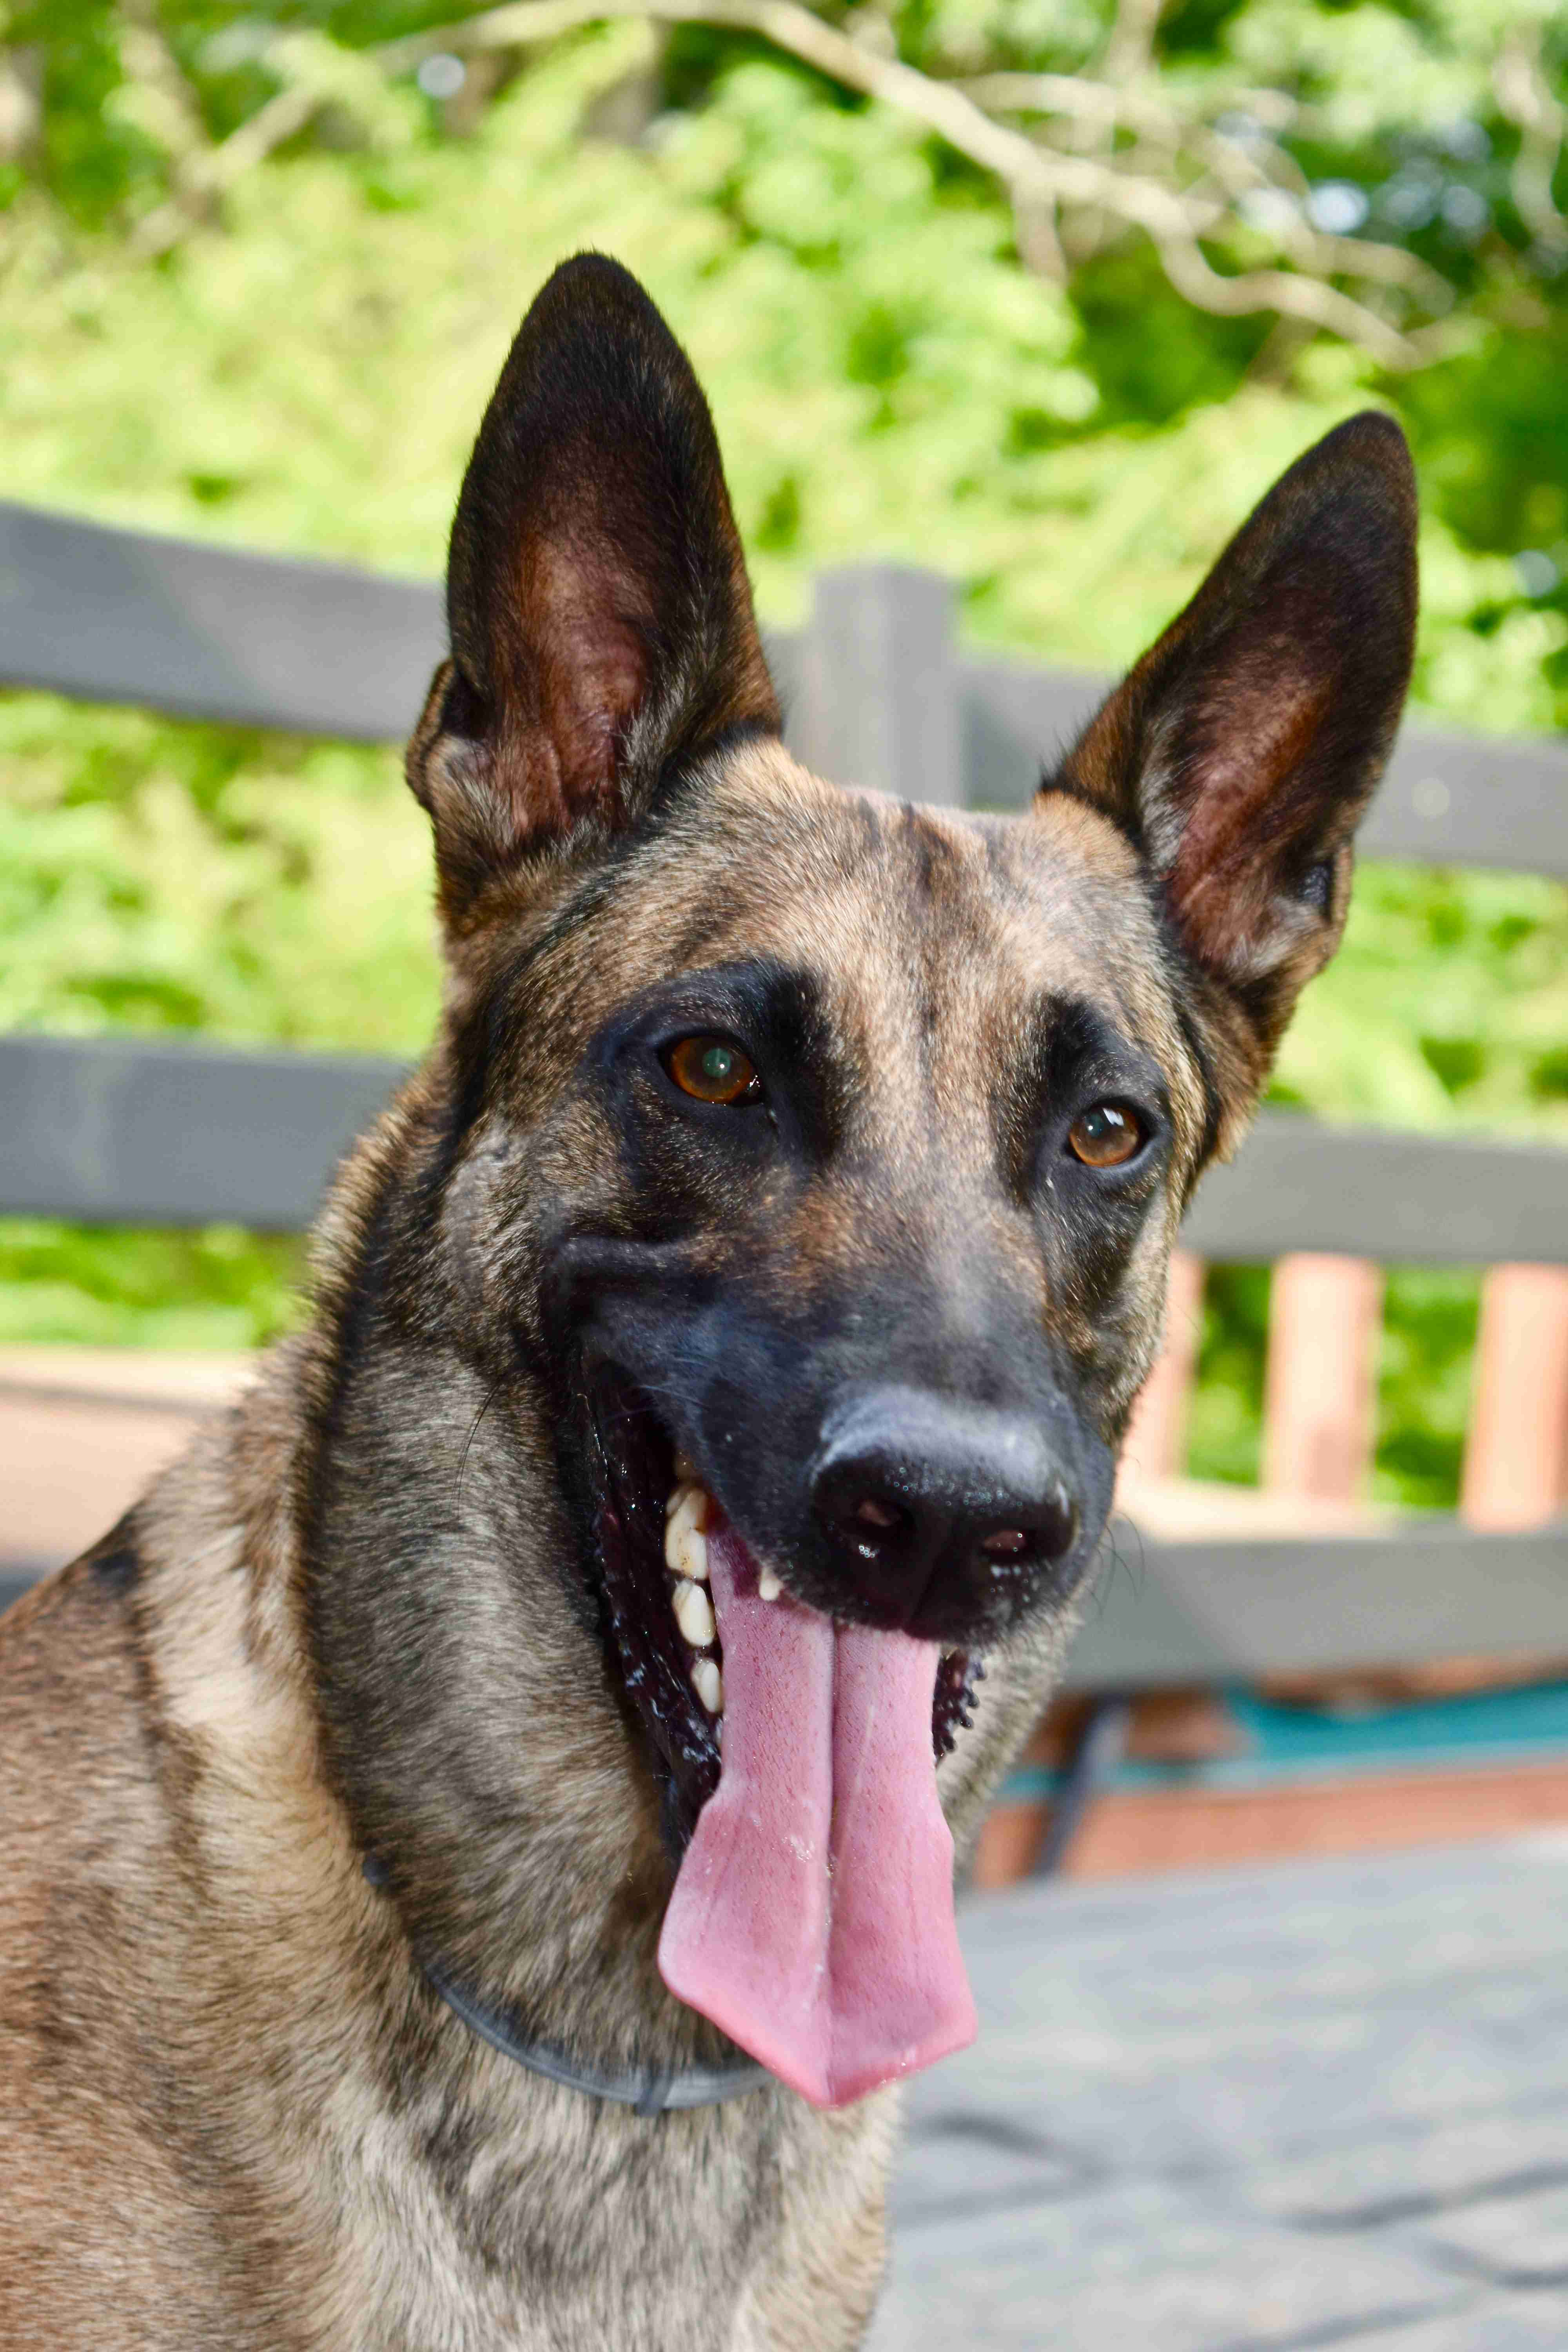 Can German shepherds be trained to protect their owners?